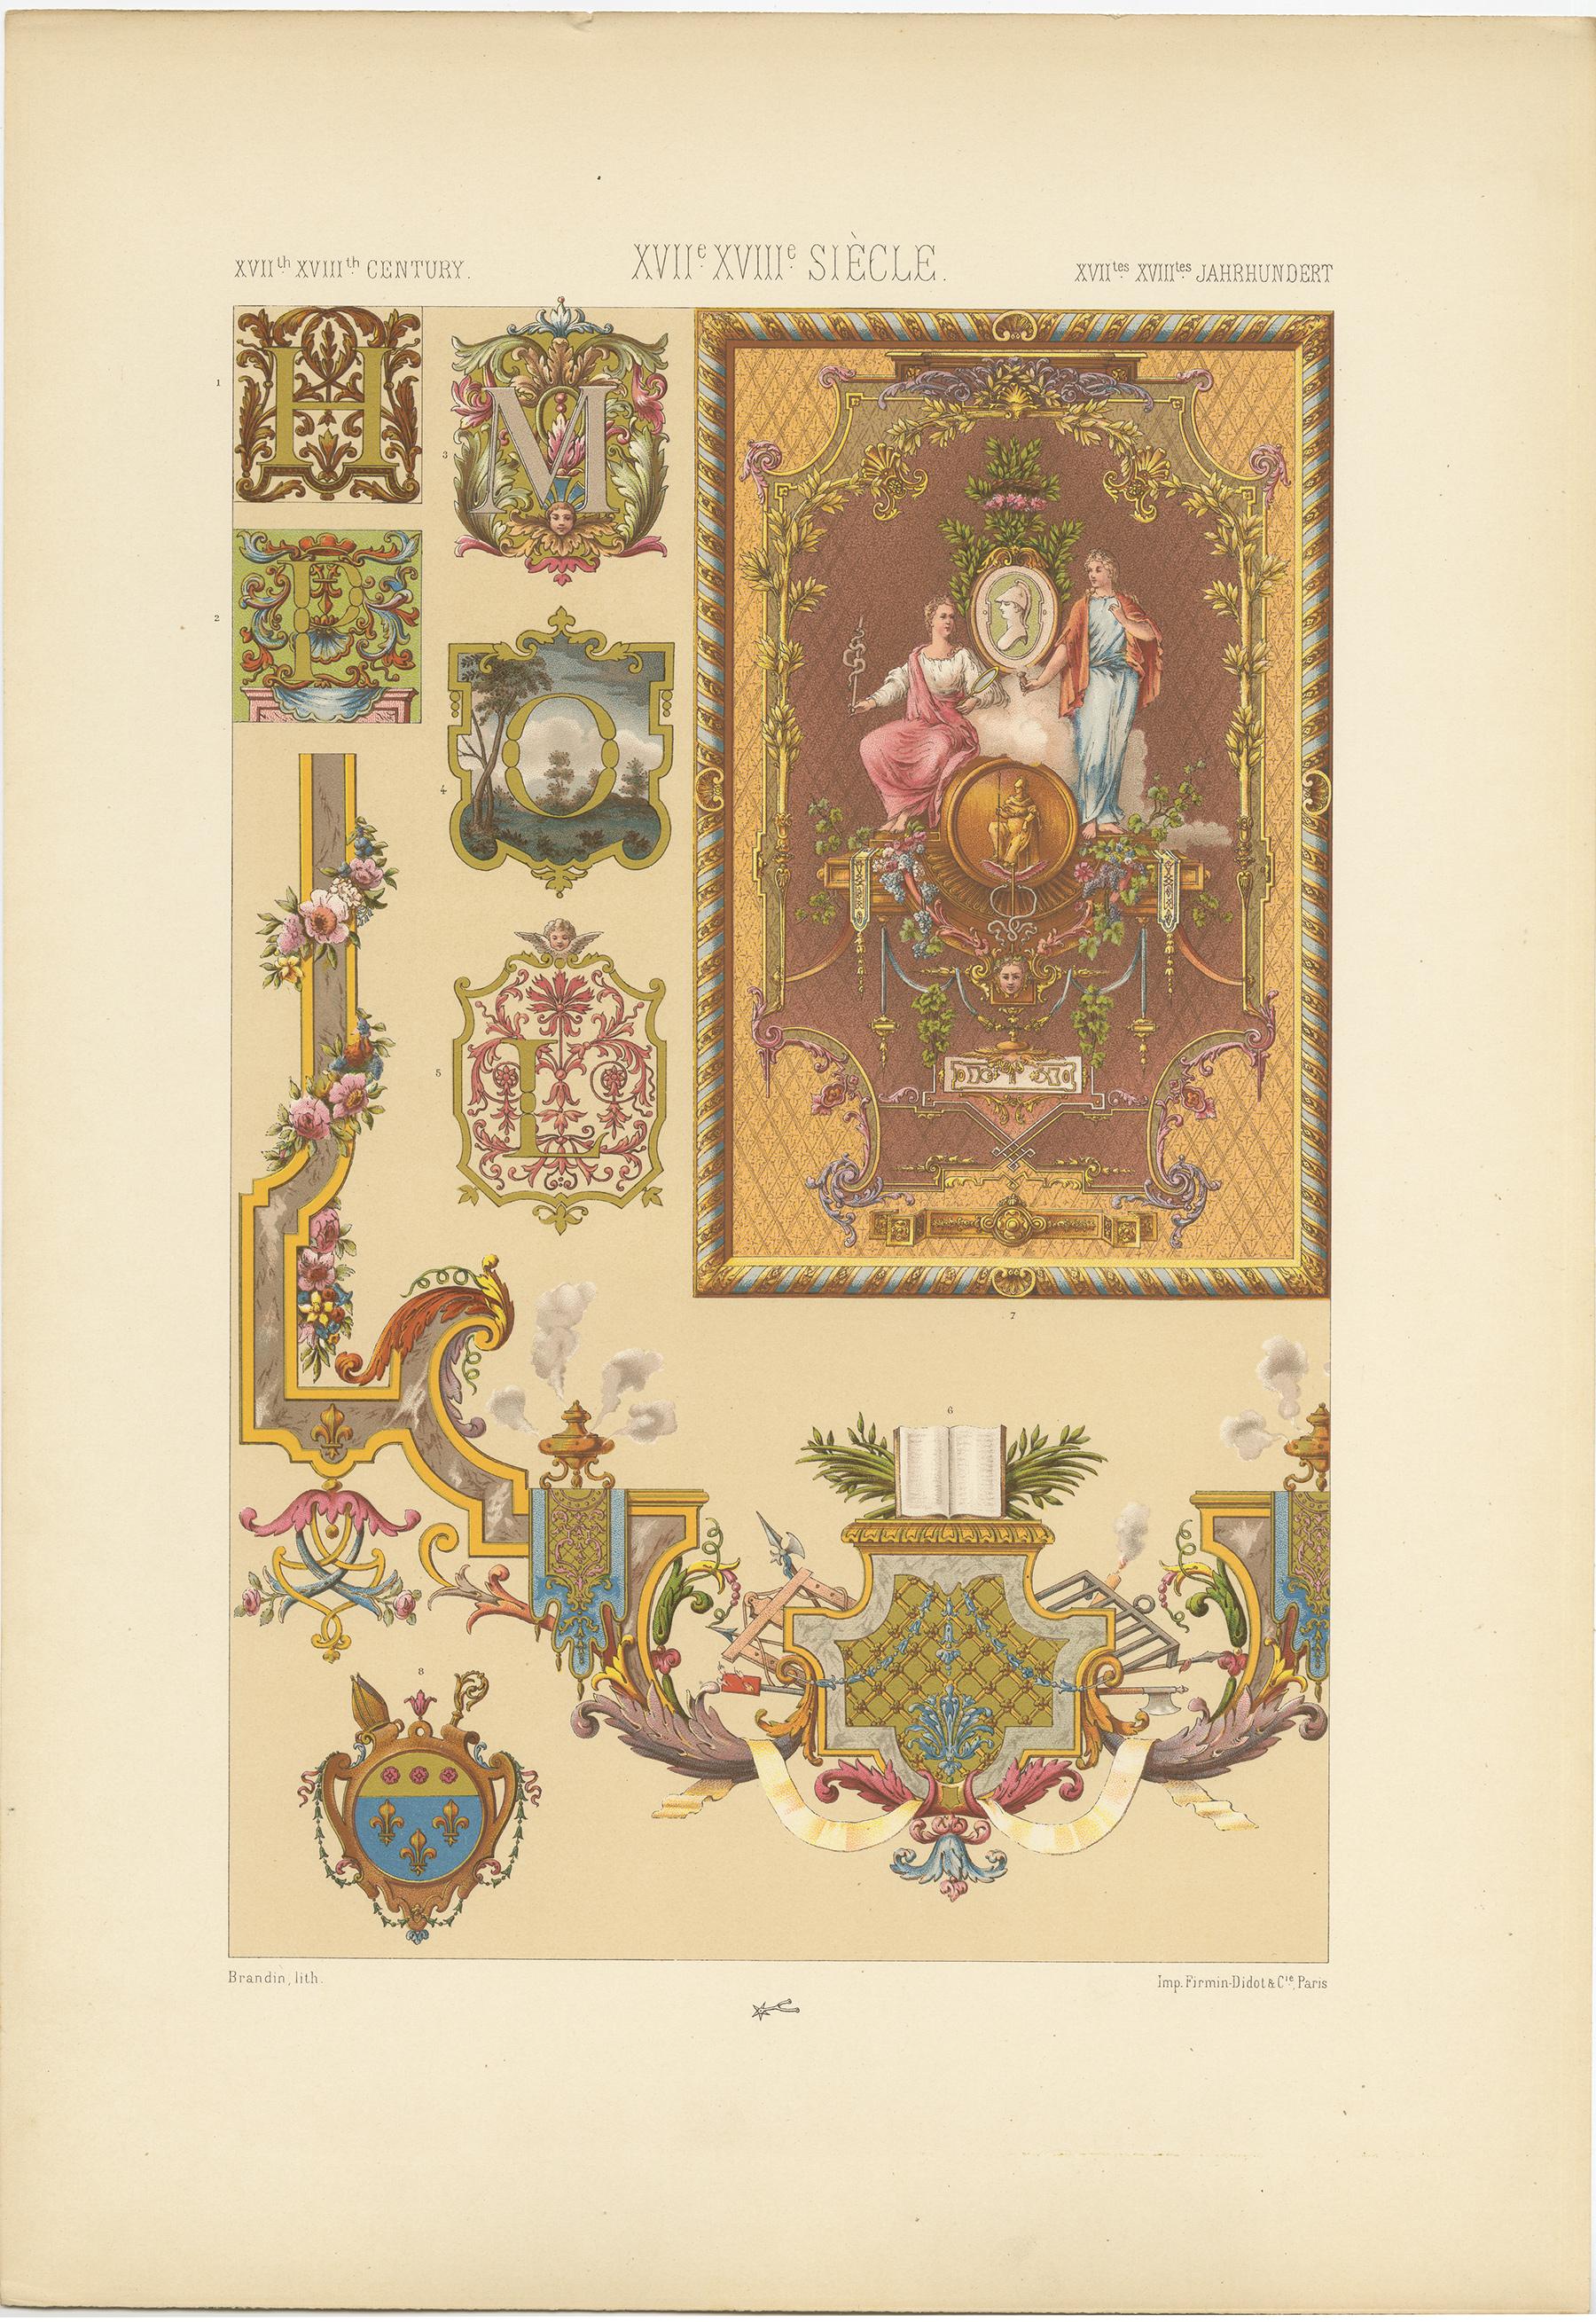 Antique print titled '17th - 18th Century - XVIIc-XIIIc Siècle - XVIILes-XVIIIles Jahrhundert'. Chromolithograph of detail from French tapestries and miniature paintings ornaments. This print originates from 'l'Ornement Polychrome' by Auguste